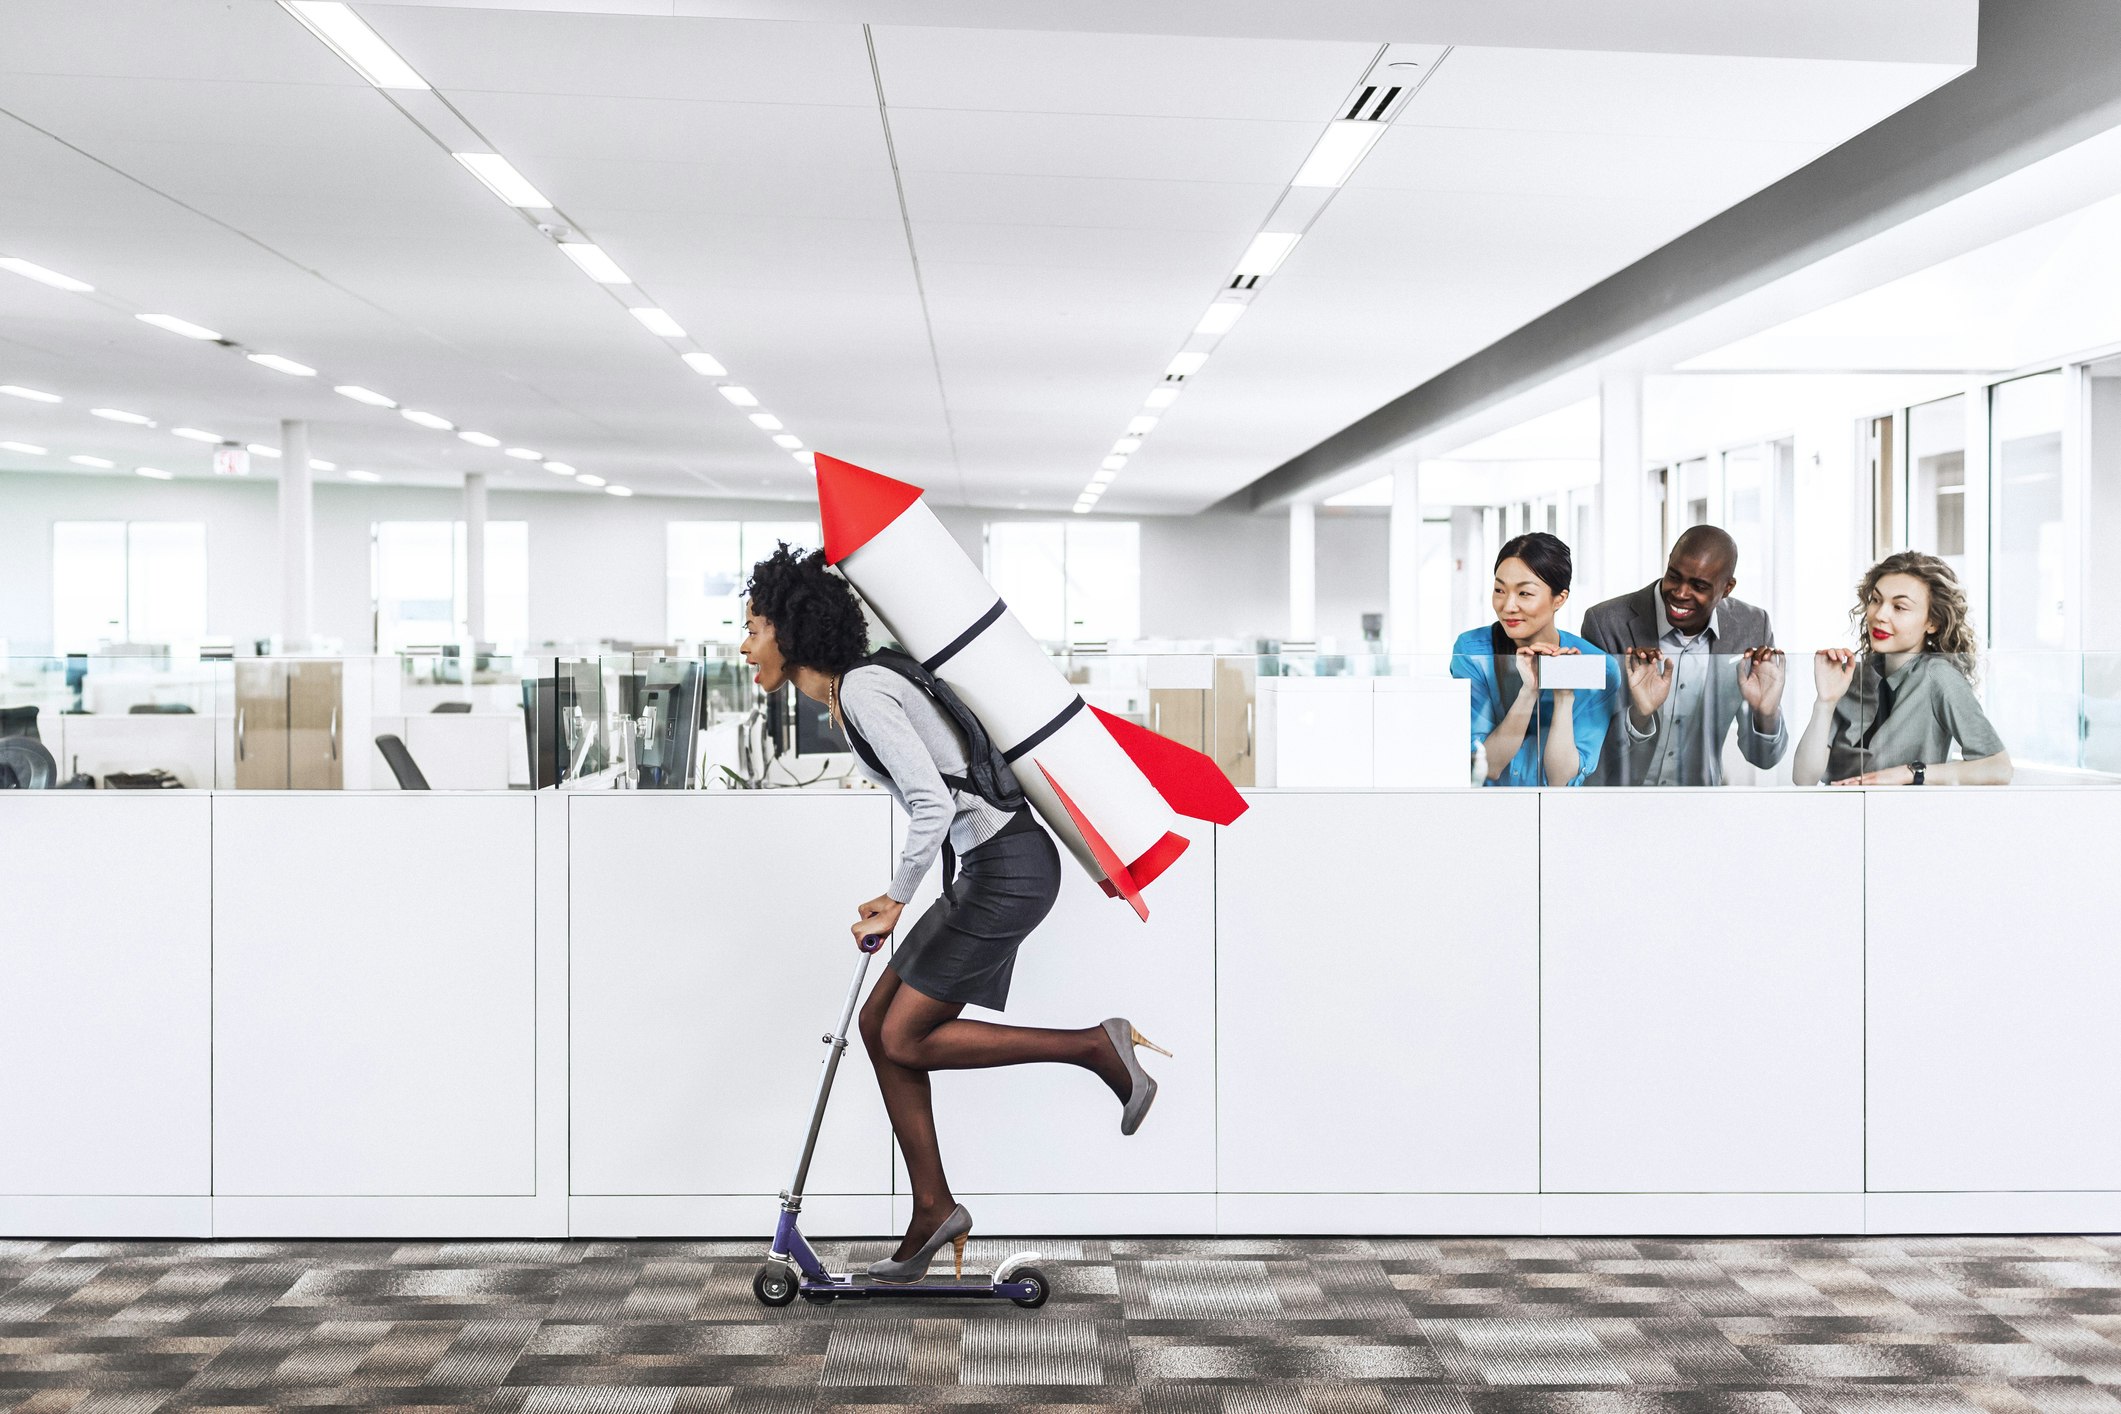 A female is on a scooter in an office and has a rocket on her back. Three people look on.